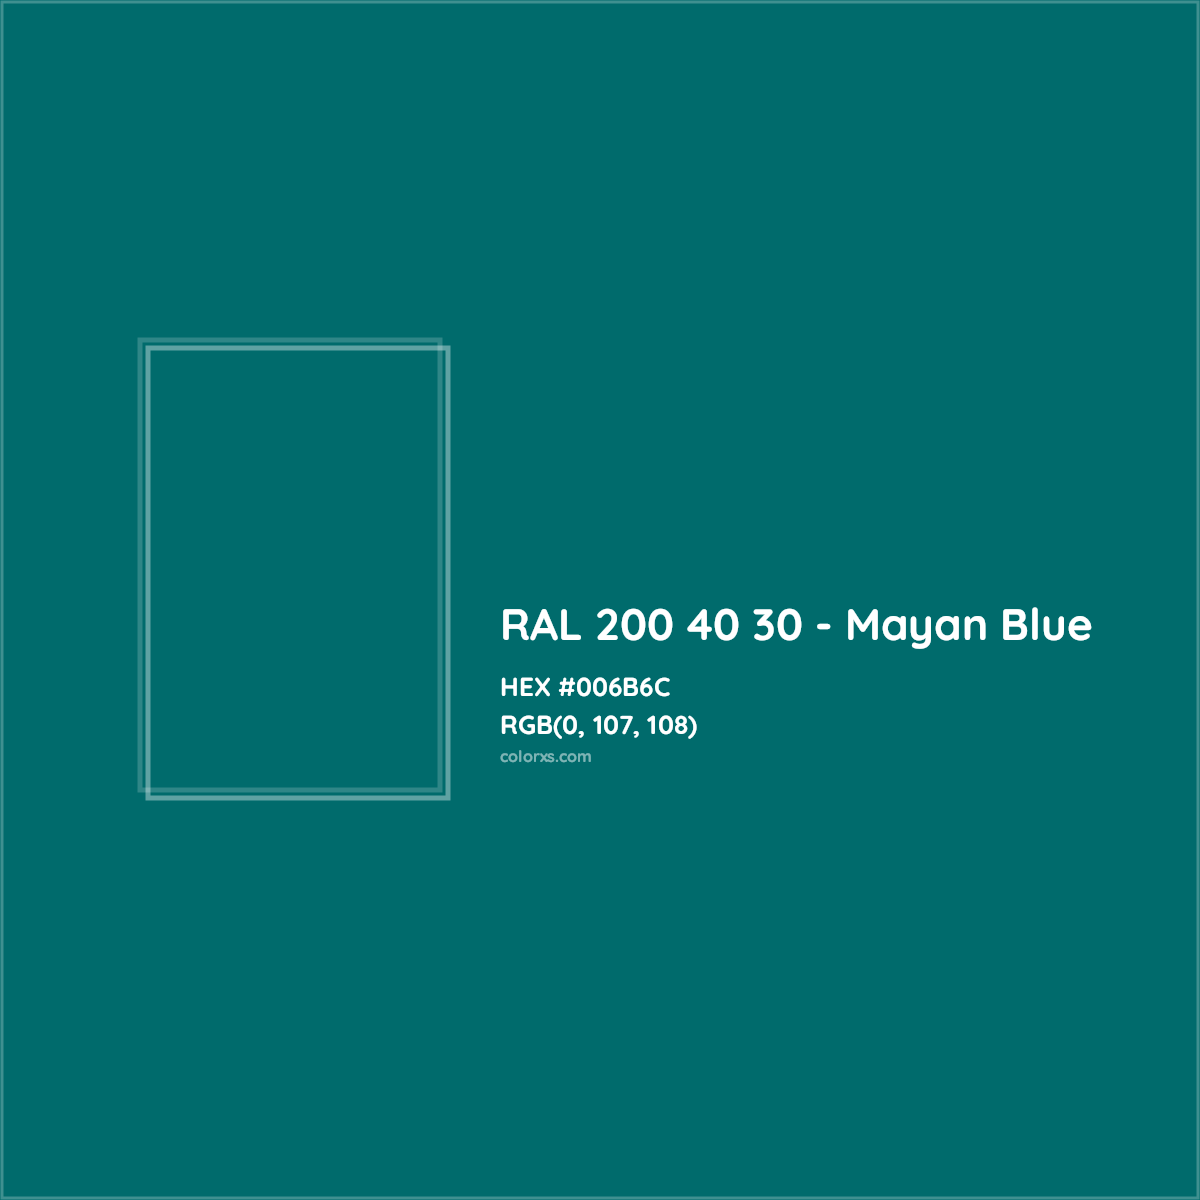 HEX #006B6C RAL 200 40 30 - Mayan Blue CMS RAL Design - Color Code